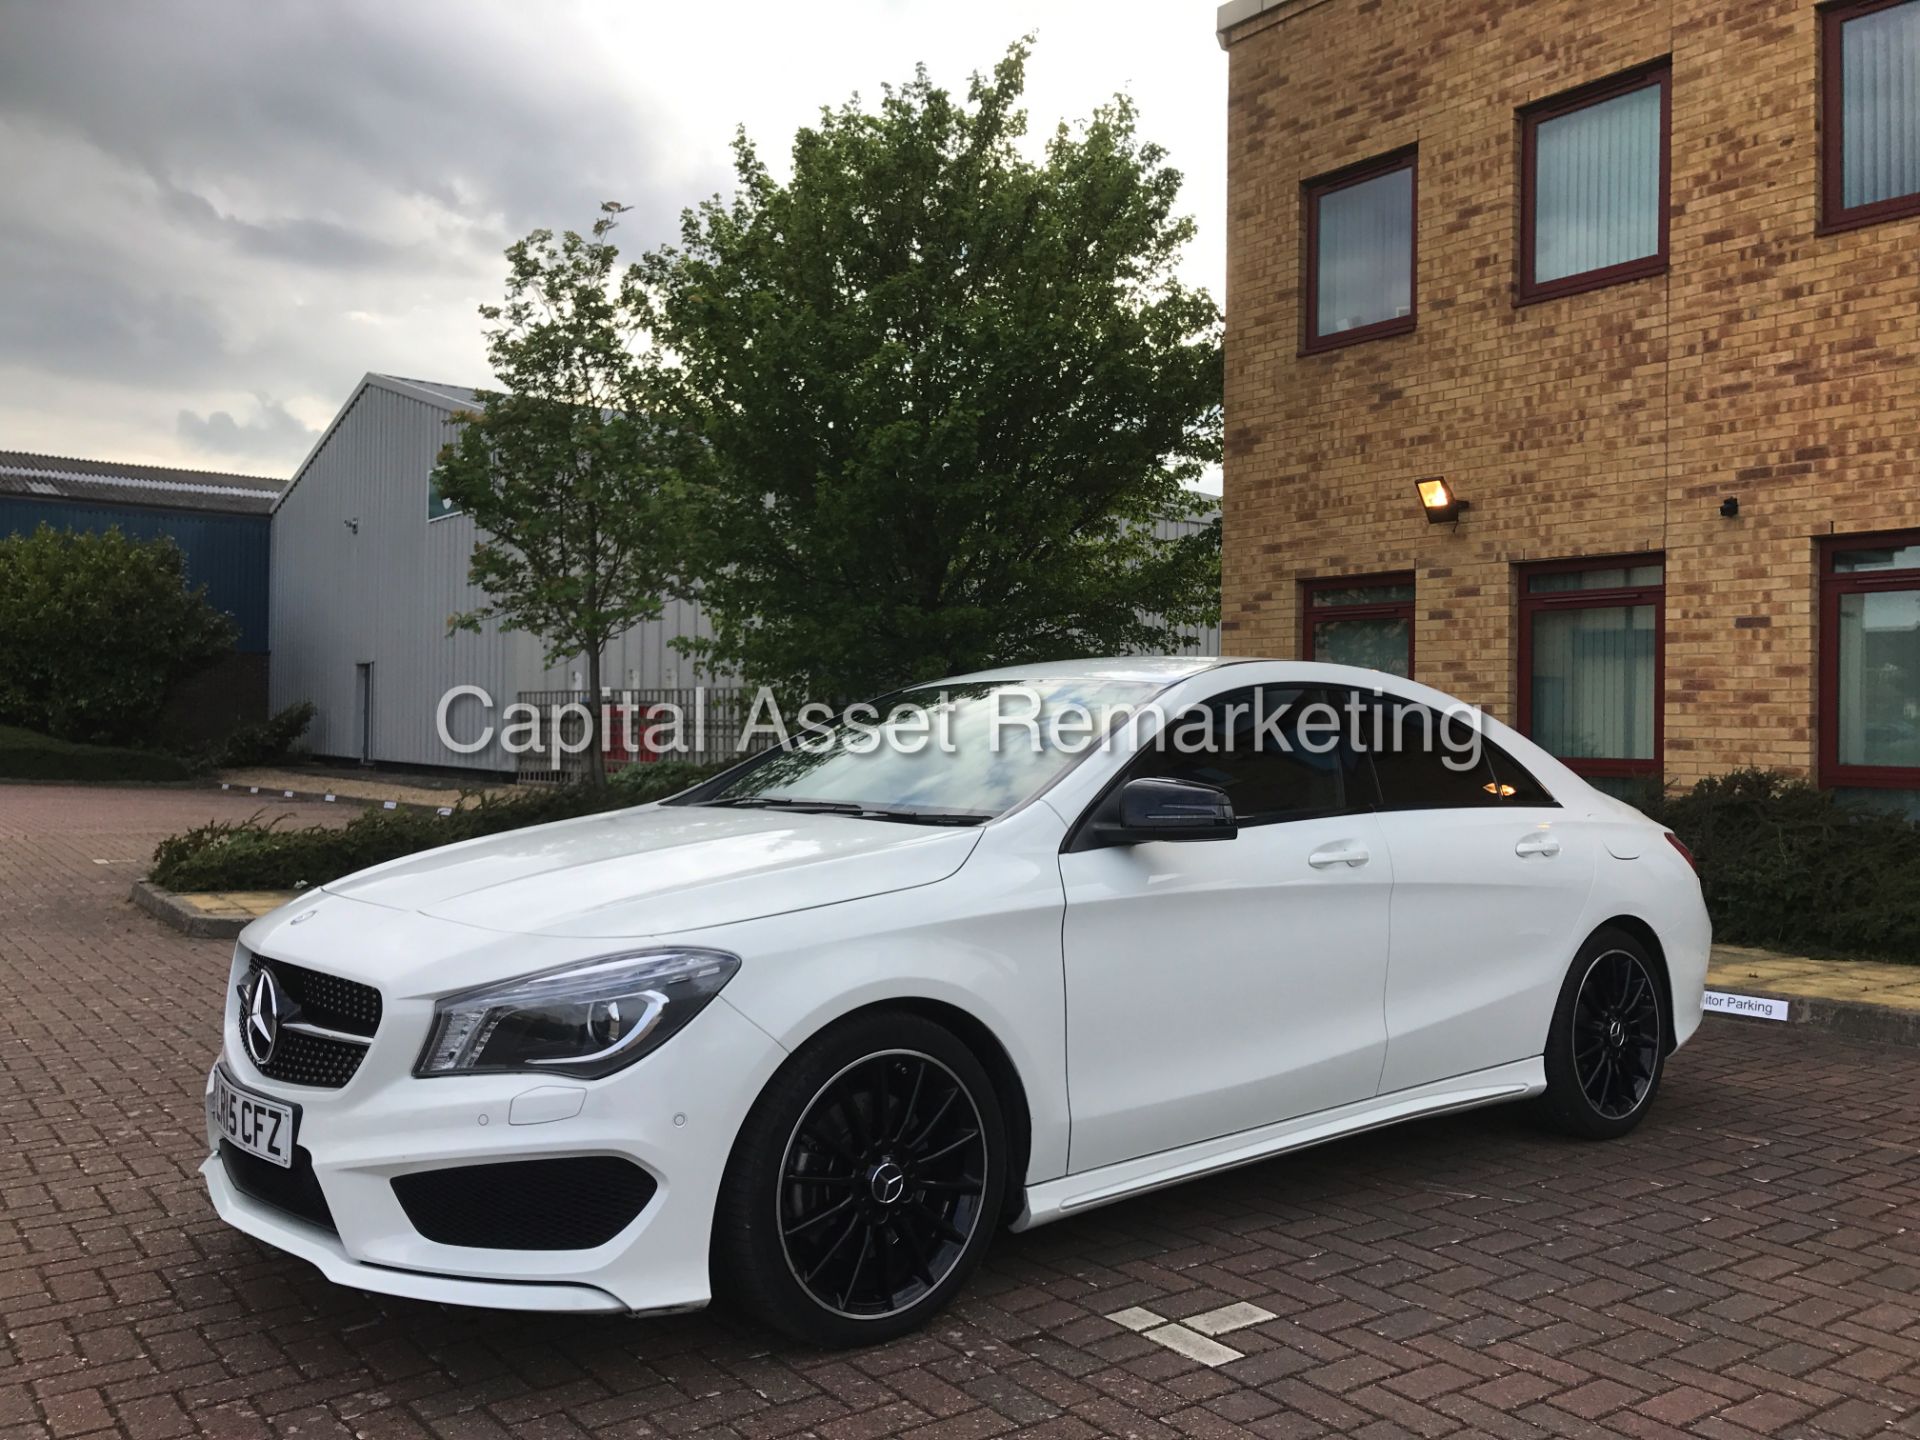 MERCEDES-BENZ CLA 220d 'AMG - NIGHT EDITION' (2015) '7-G AUTO - LEATHER - SAT NAV' *HUGE SPEC* - Image 3 of 24